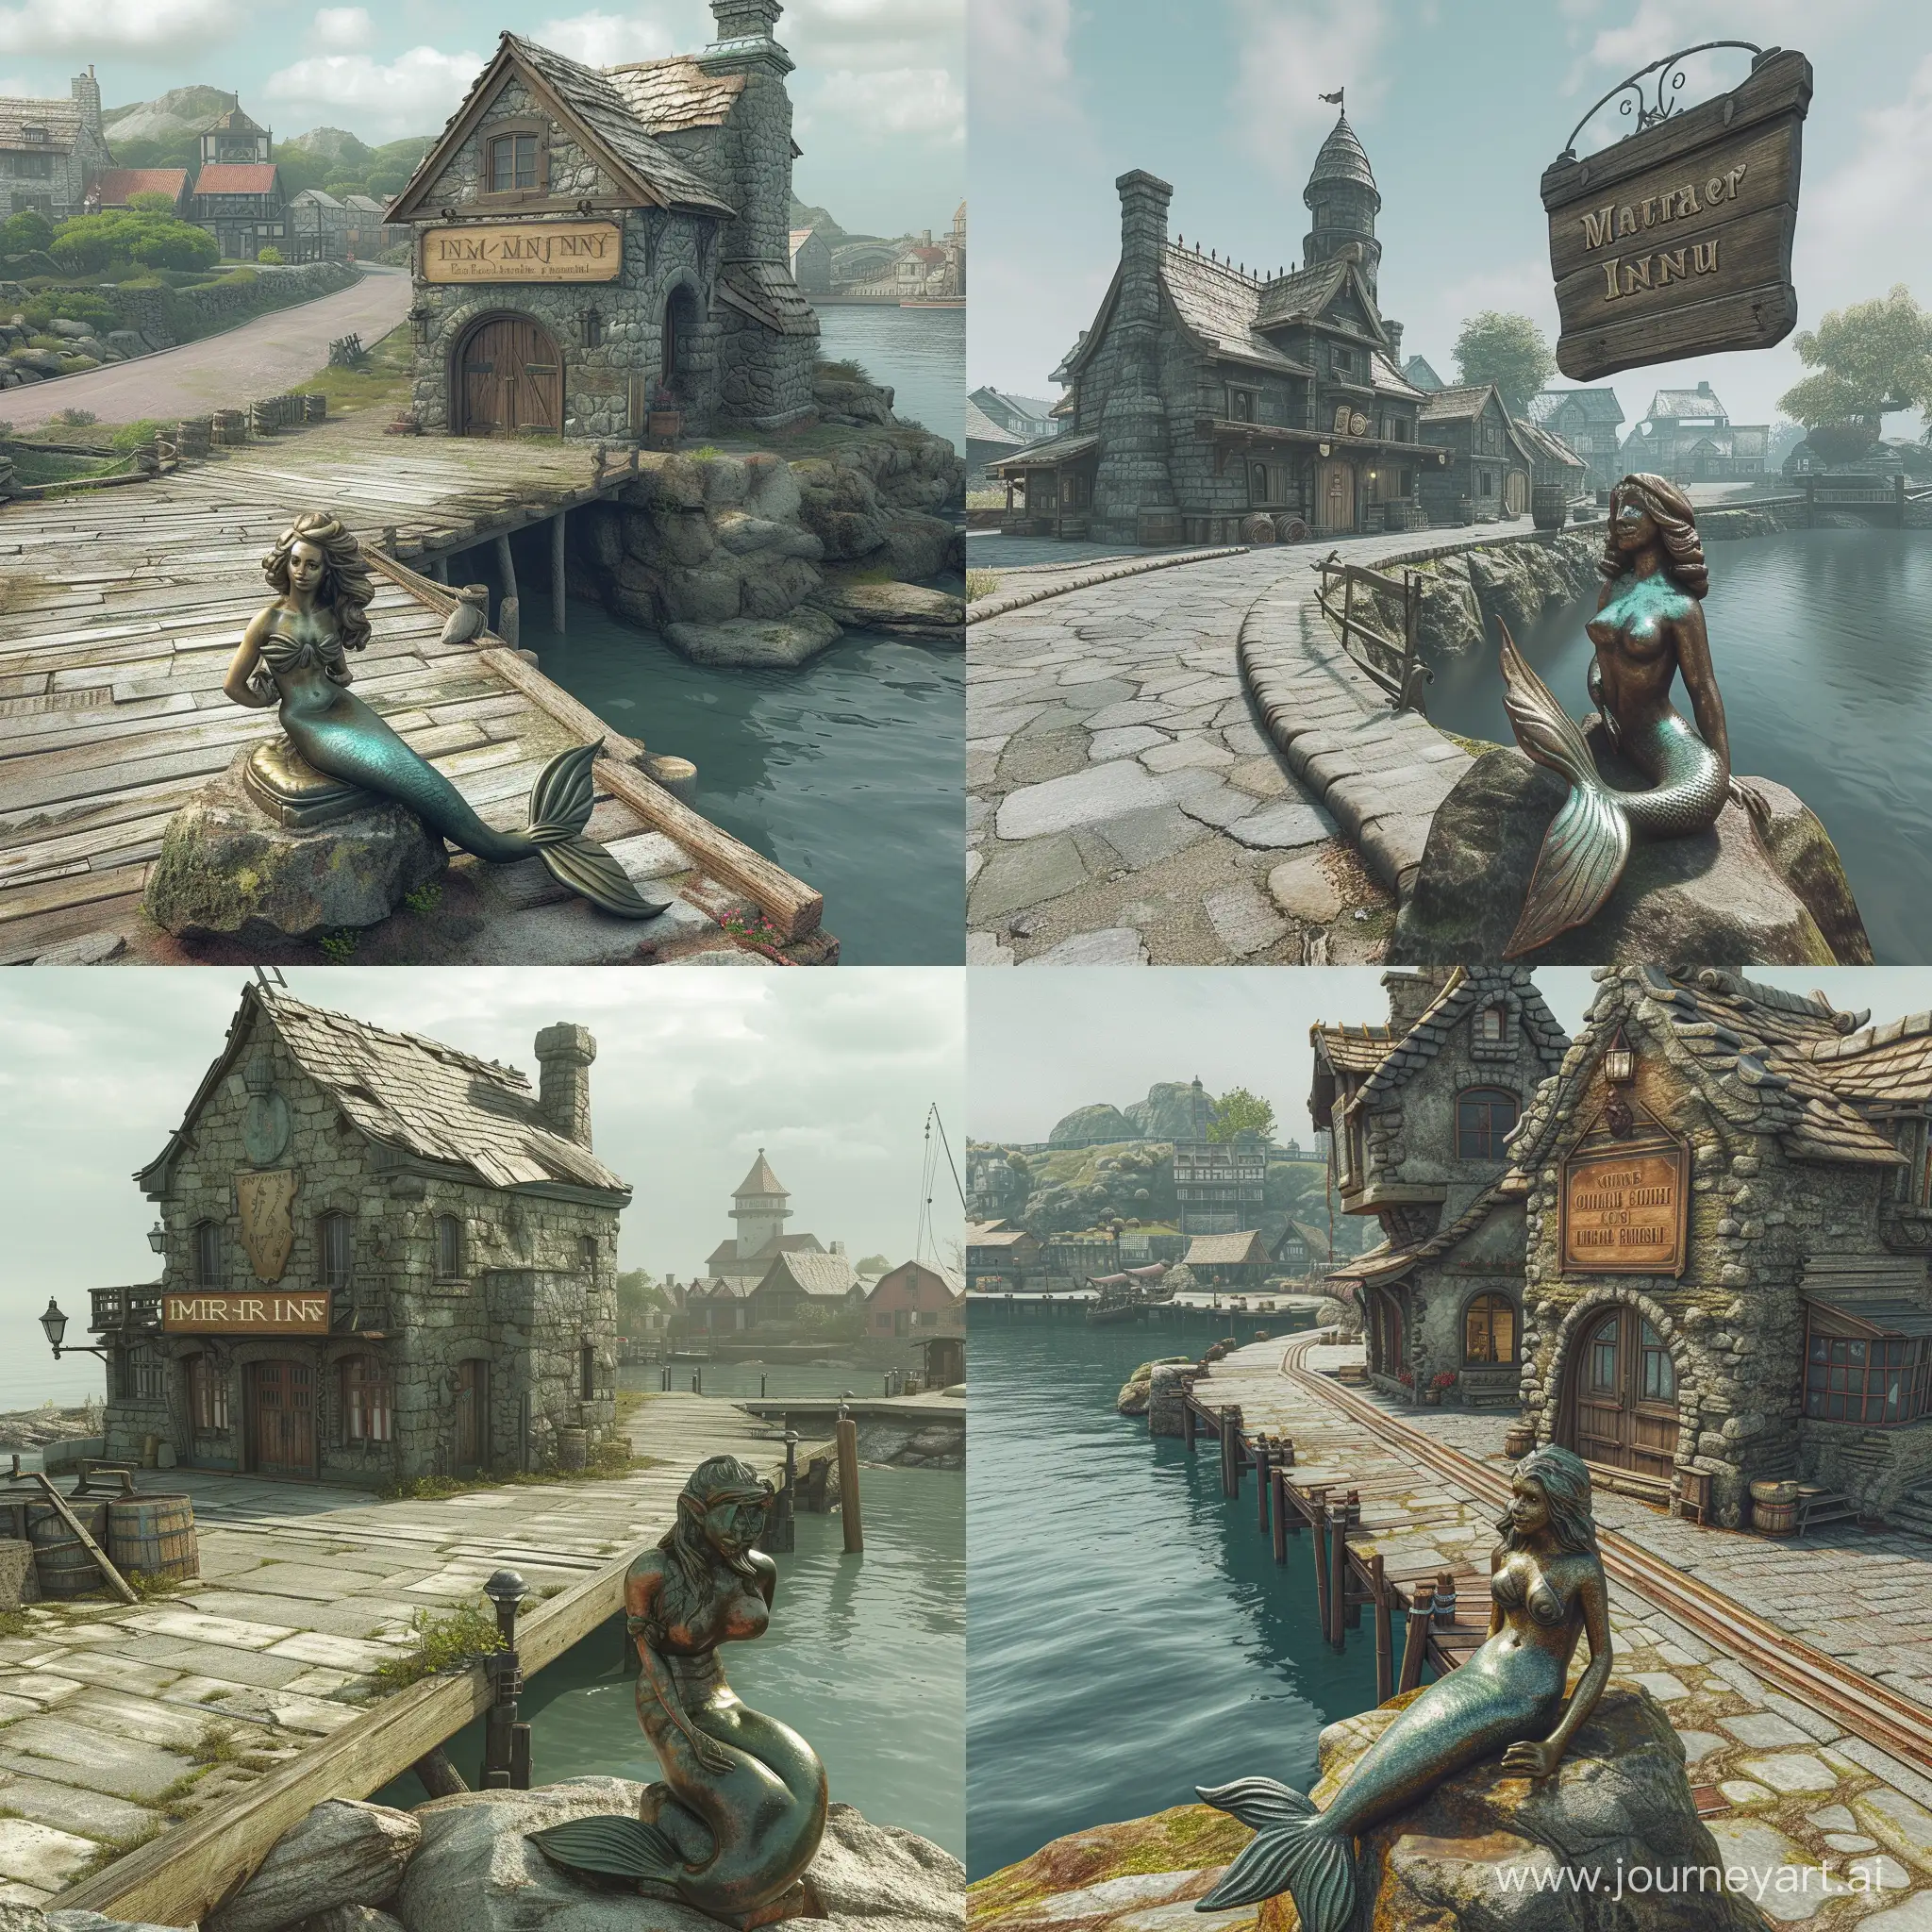 A worn down fantasy stone inn in a large port on docks by the sea. A wooden sign hangs above inn doors, bellow to the side a Bronze mermaid statue. Statue is posed in a sitting on a rock in front of the inn's entrance on dock. There is a wide road between inn and sea. Behind inn and to the side there are more houses. Top of the statue is polished bronze shine. Artistic rulebook image style.